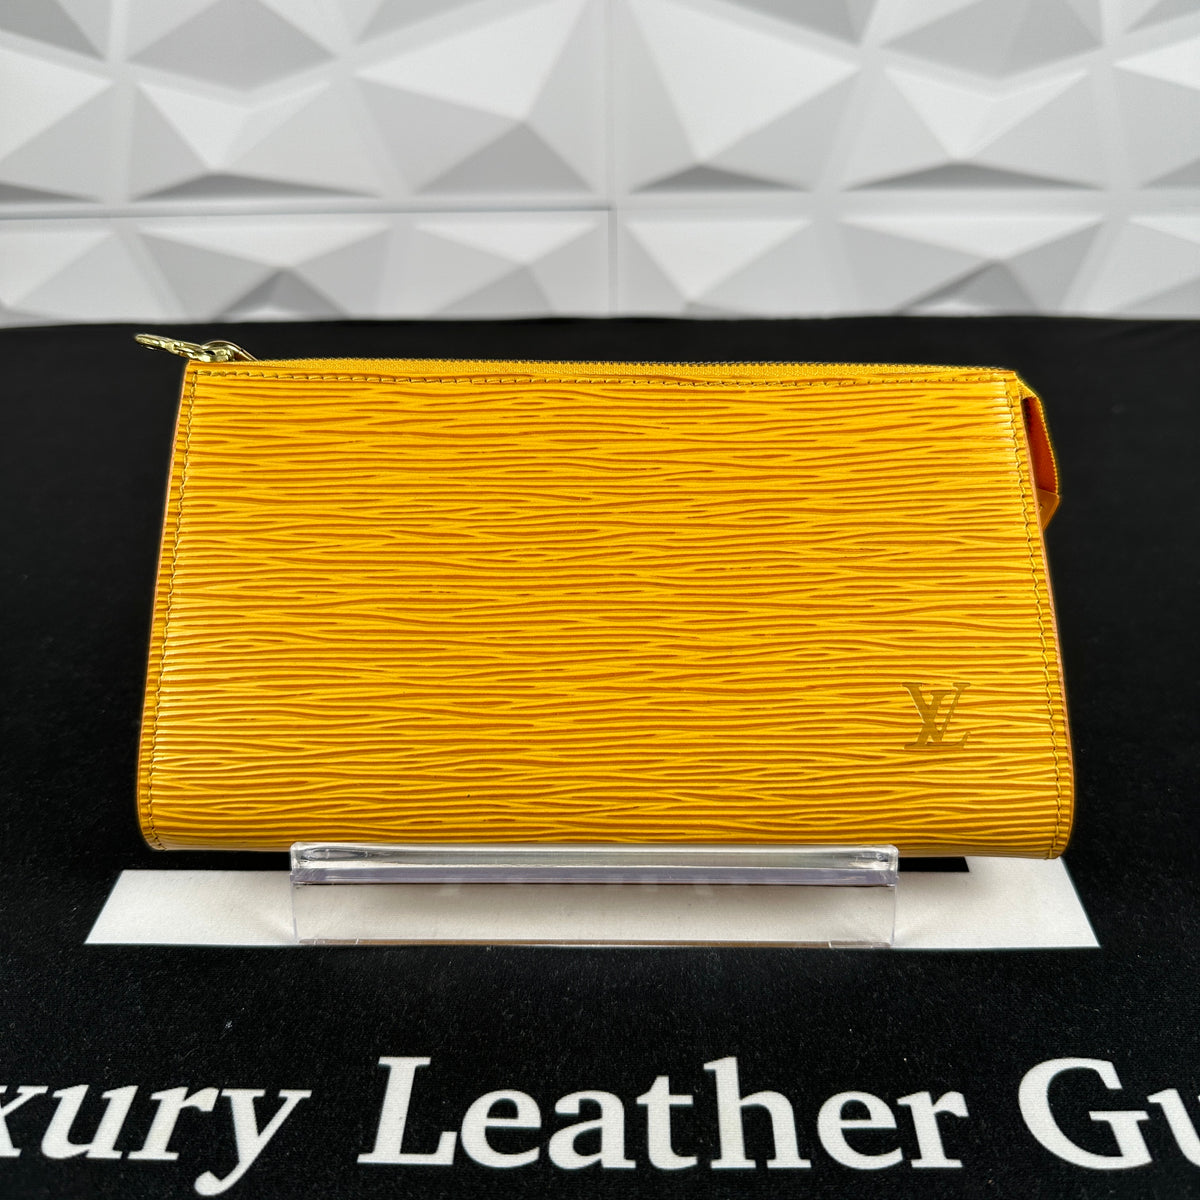 USED Louis Vuitton Yellow Epi Leather Pochette Clutch Bag AUTHENTIC